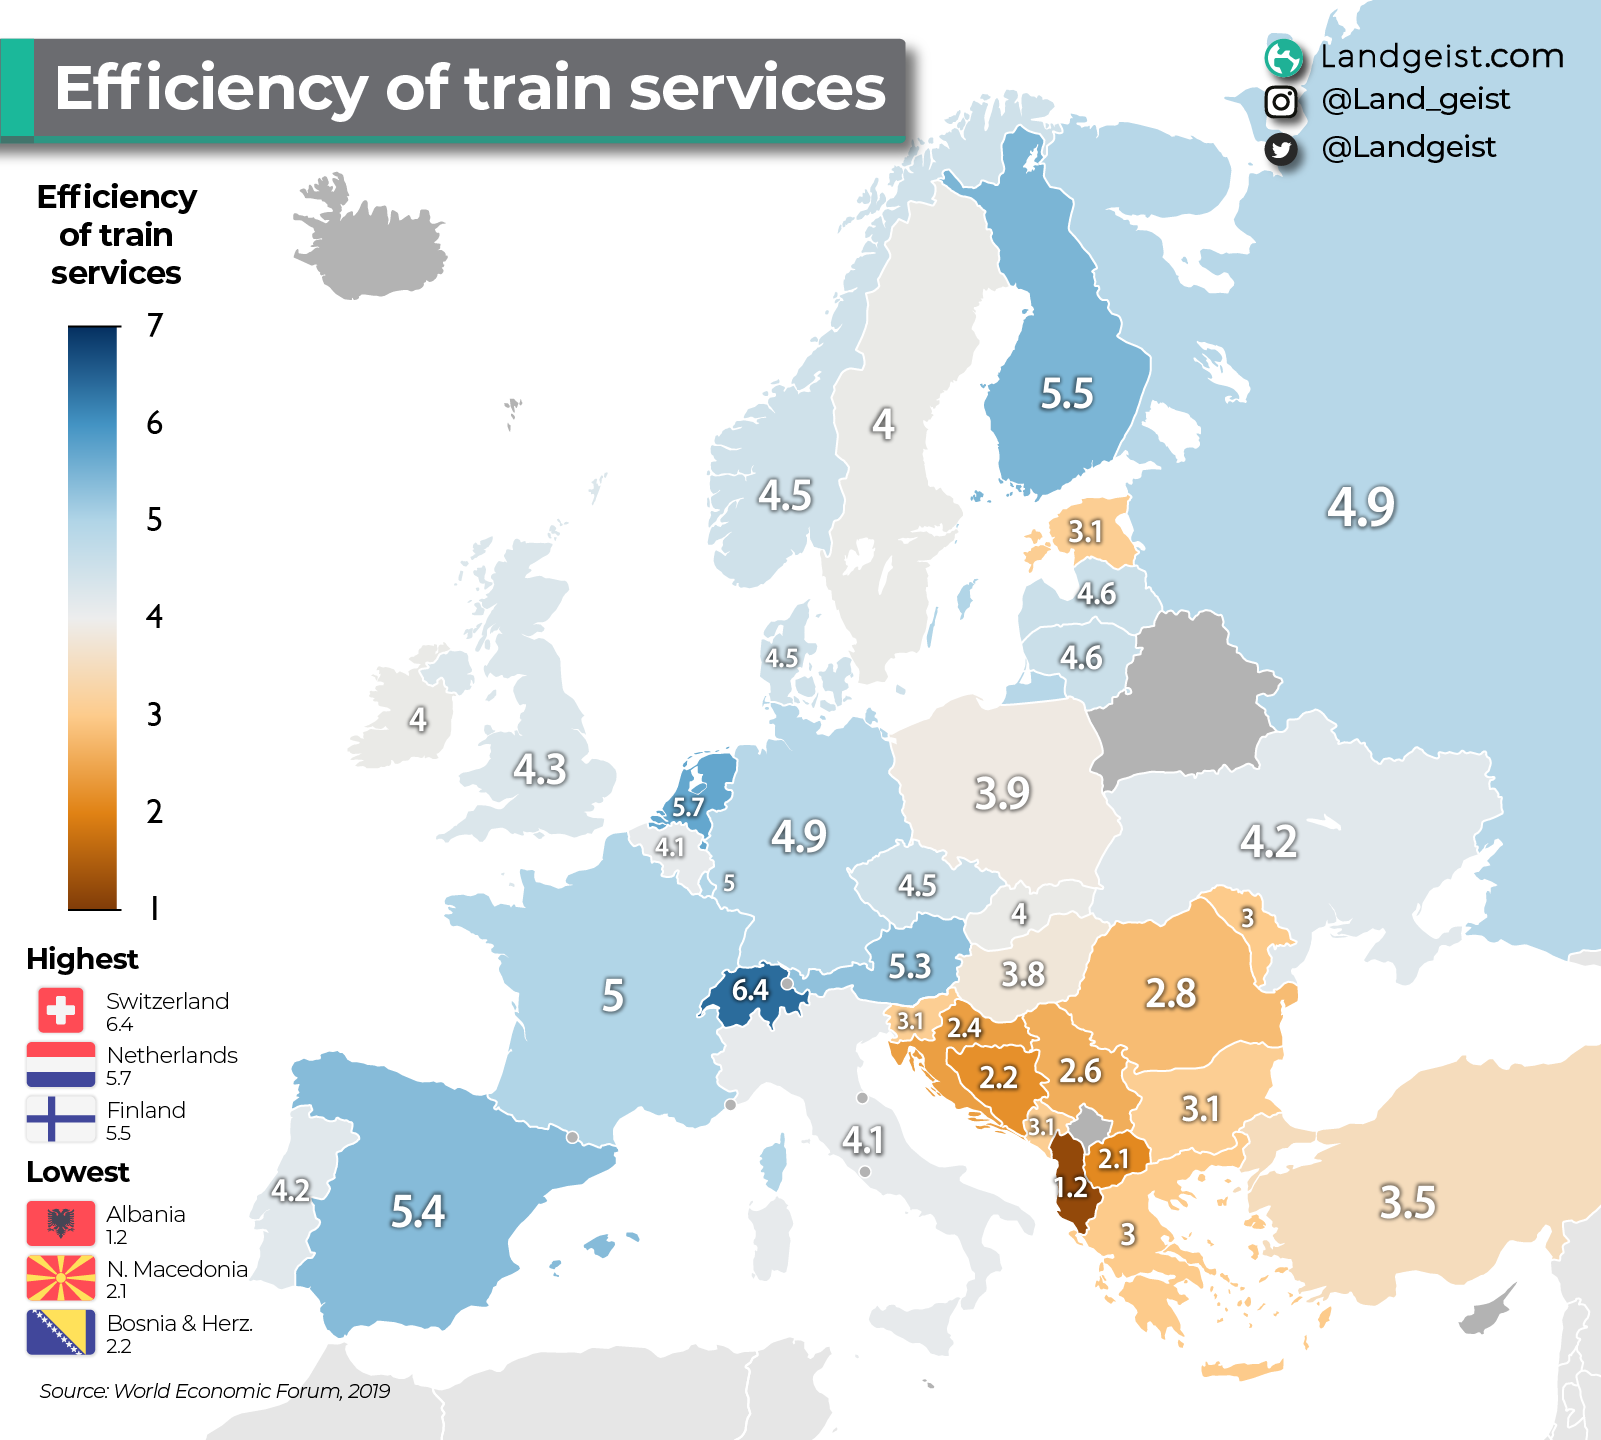 Map of the efficiency of train services in Europe.